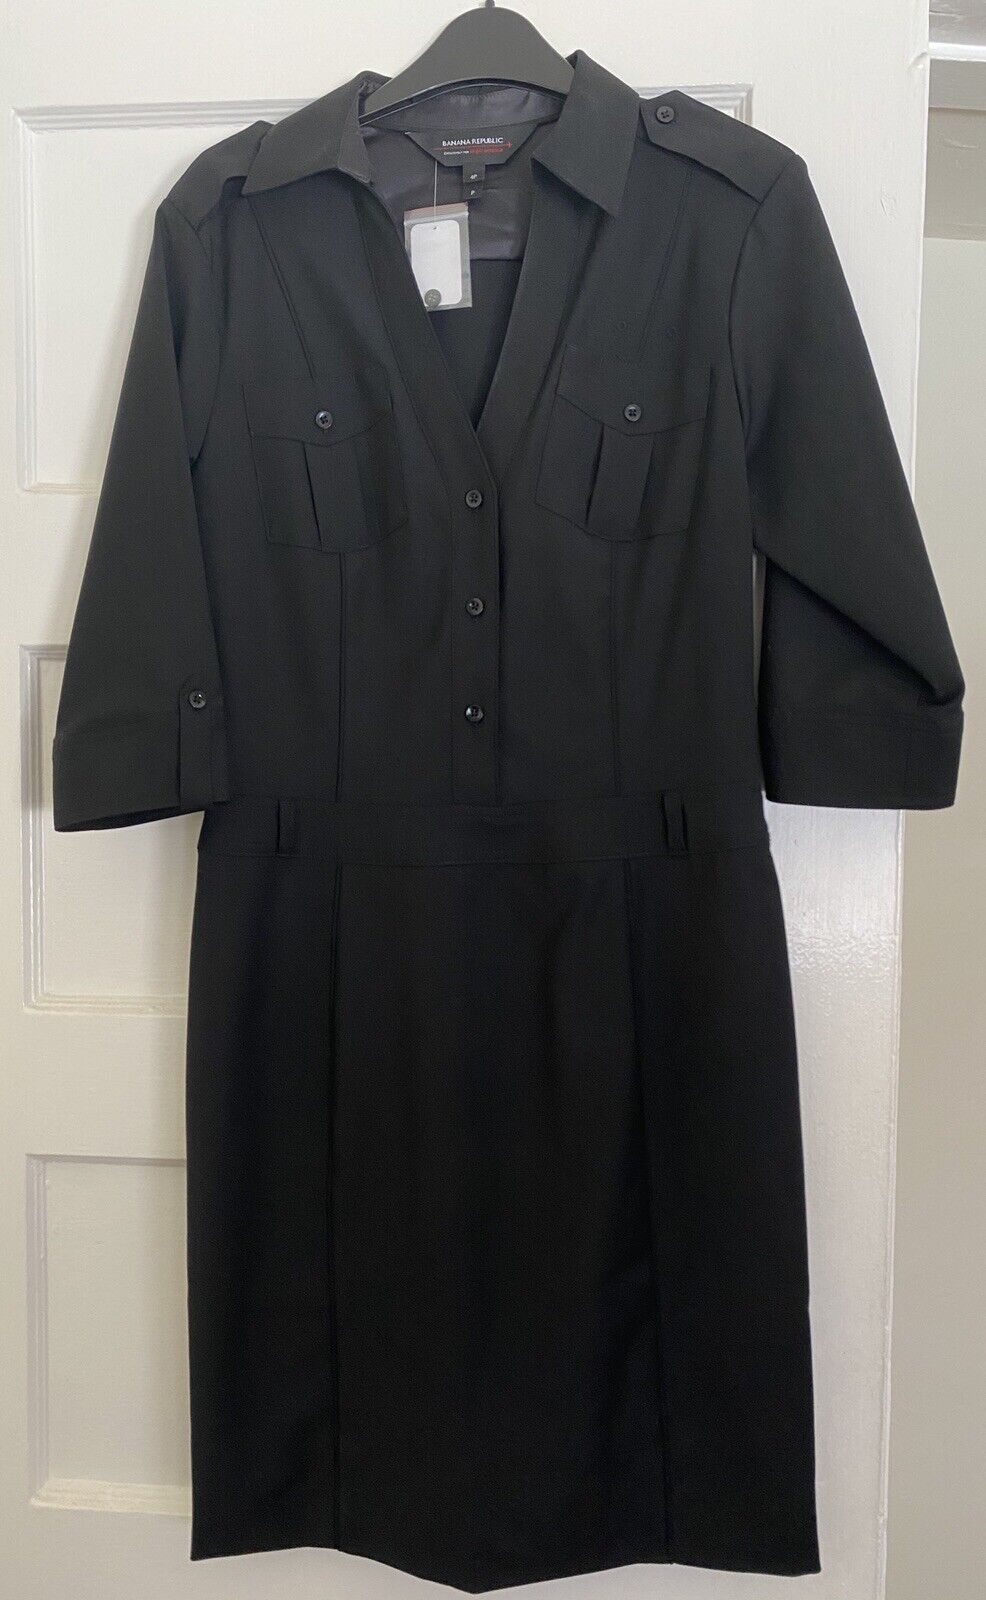 NWT Virgin America Collectible Womens Black Work Dress 4P Small Retired